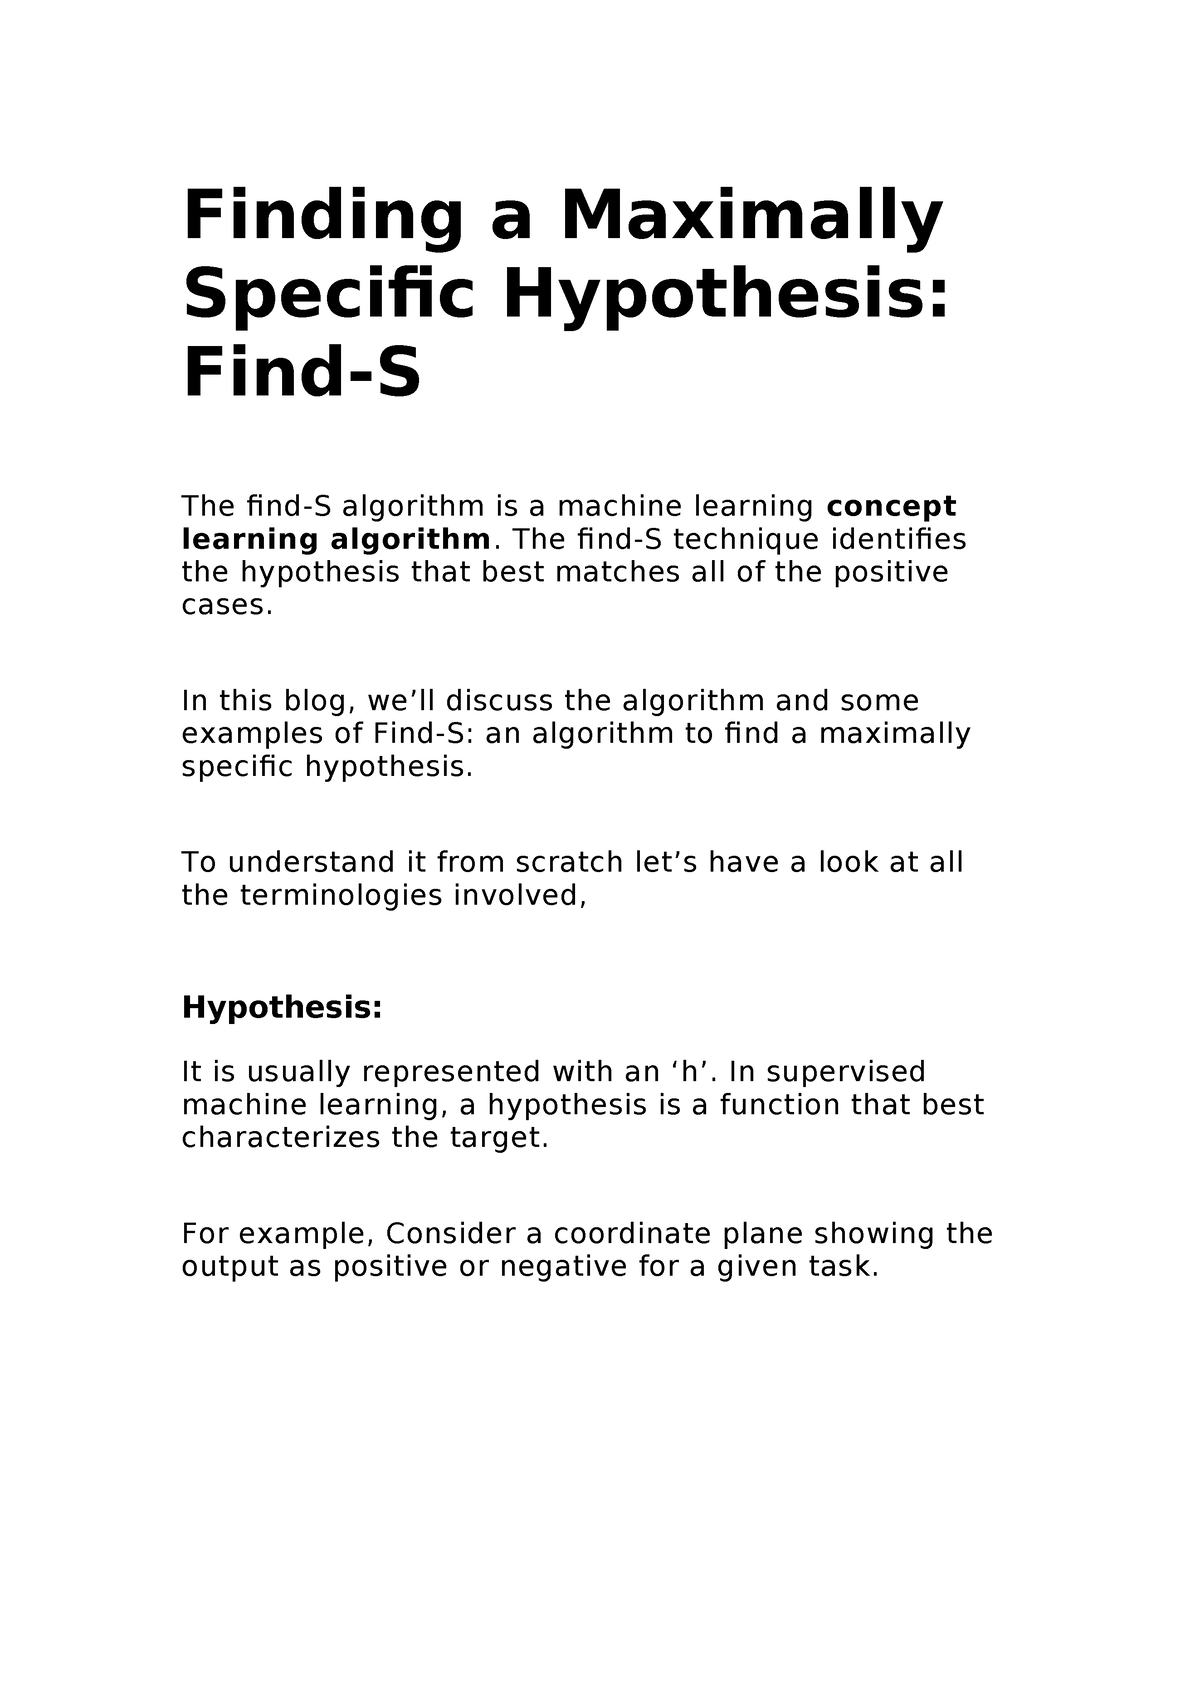 what is maximally specific hypothesis in machine learning